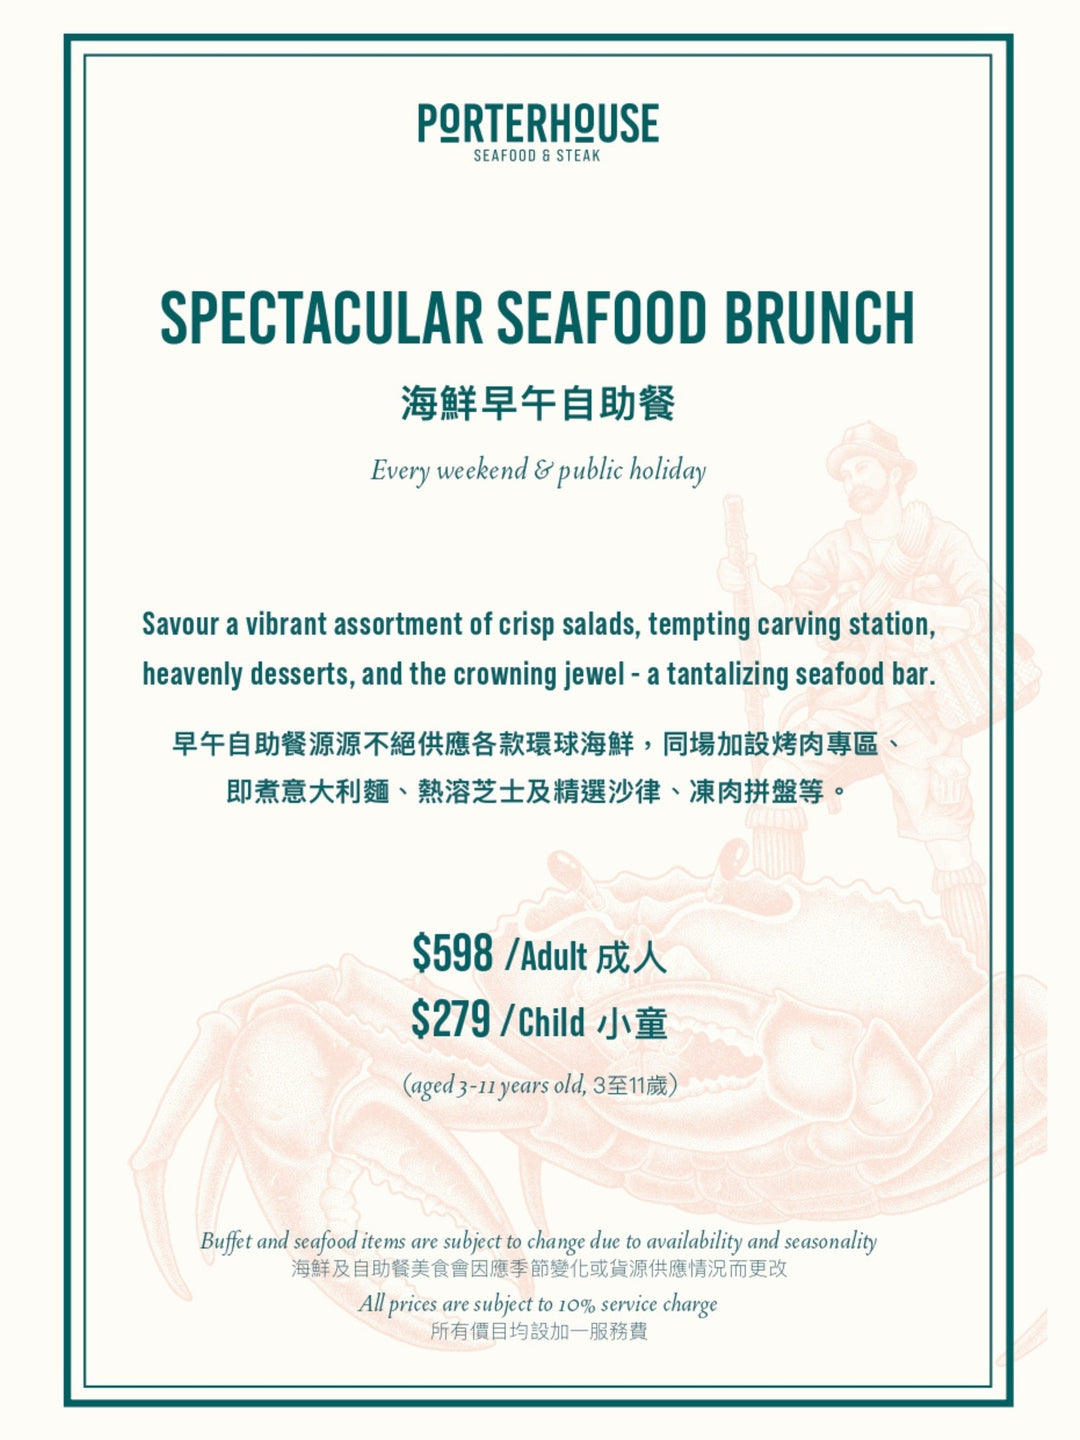 Labour Day 5.1 Offer - PORTERHOUSE SPECTACULAR SEAFOOD BUFFET